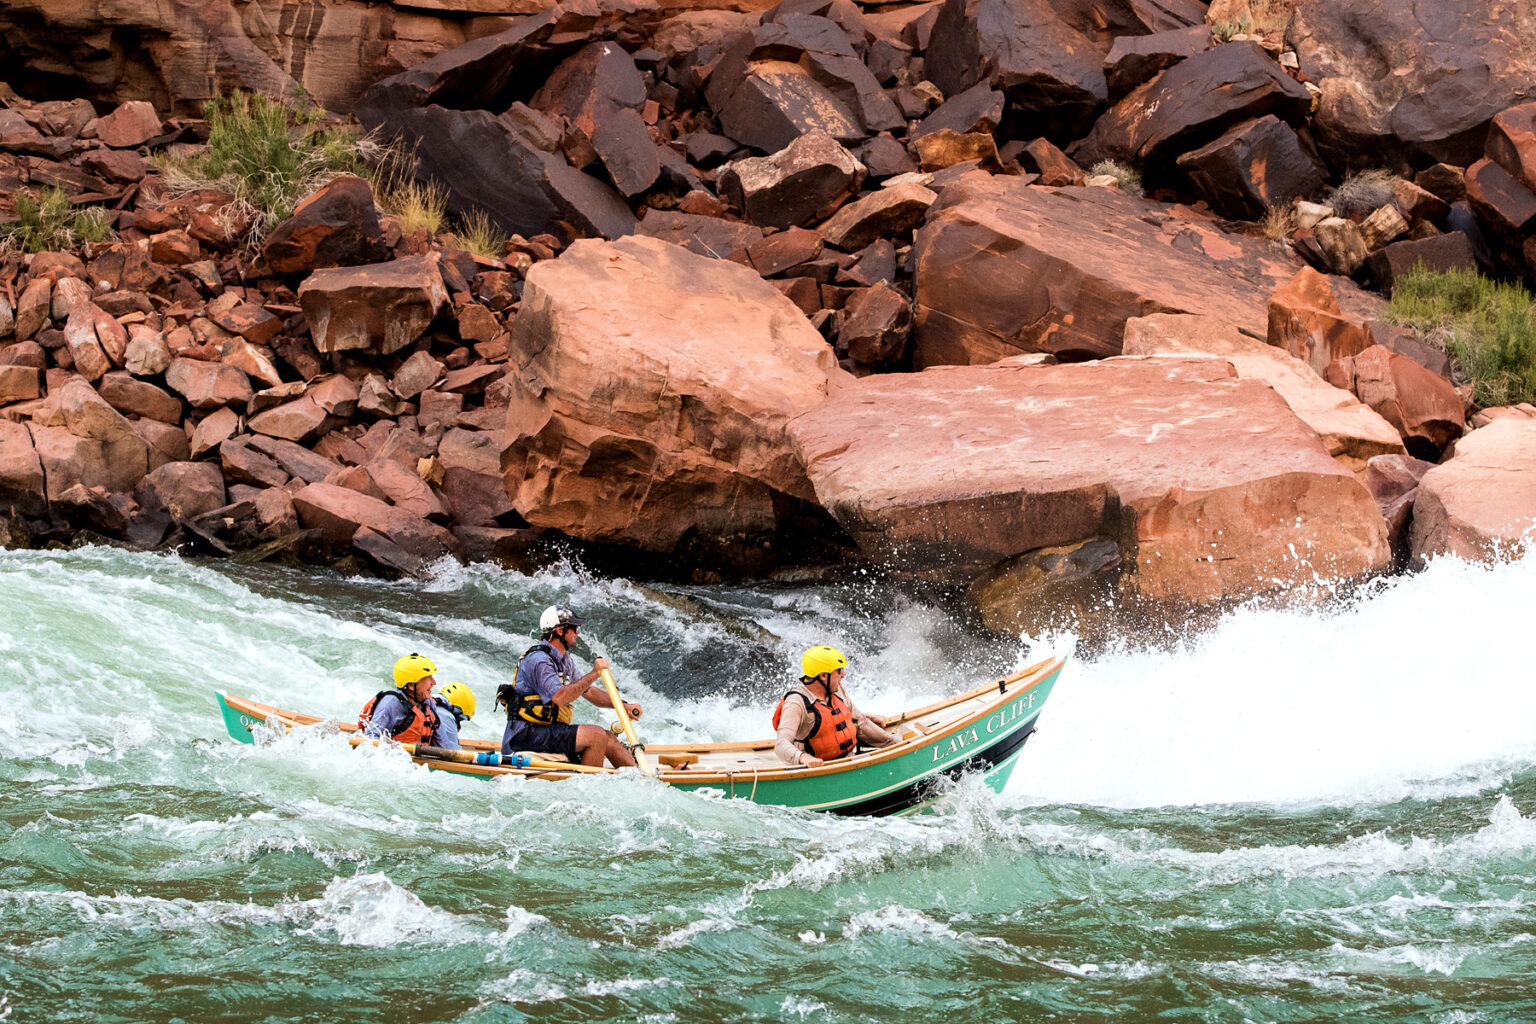 OARS Grand Canyon dory in the rapids with large boulders in the background